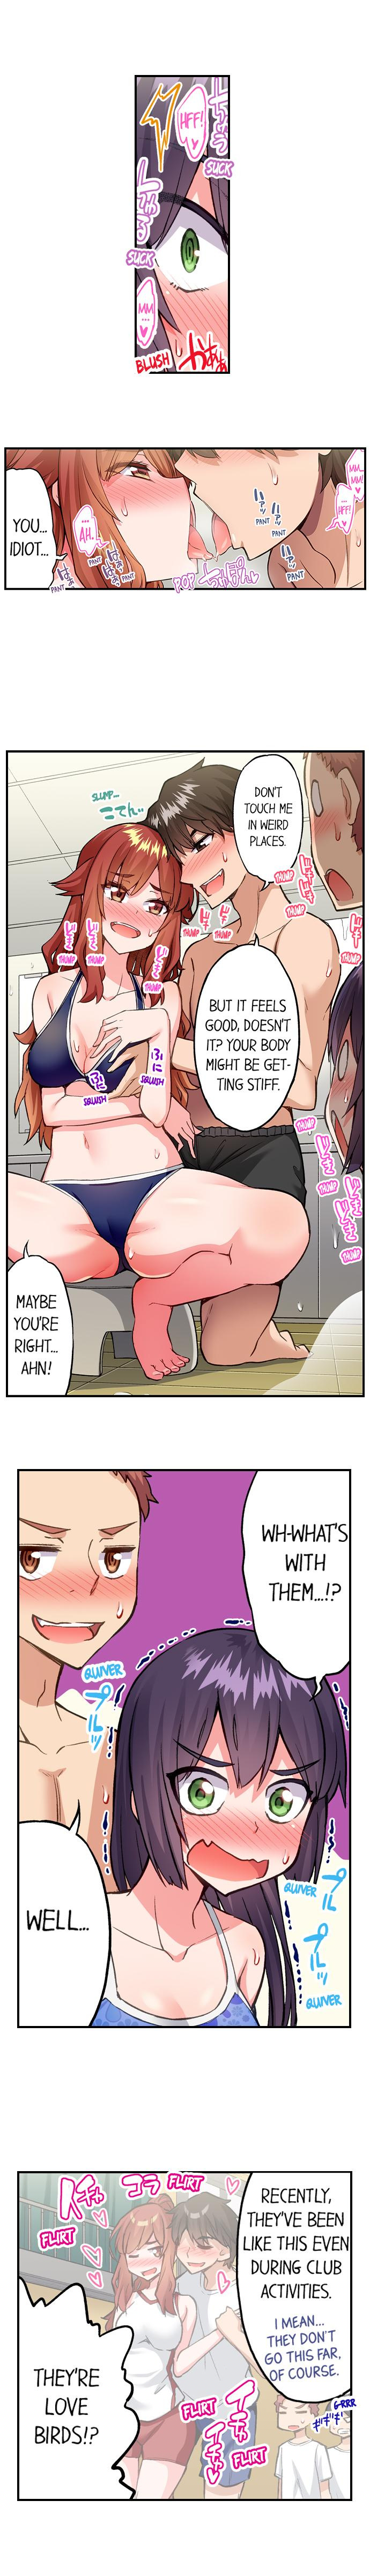 Traditional Job of Washing Girls’ Body - Chapter 189 Page 2